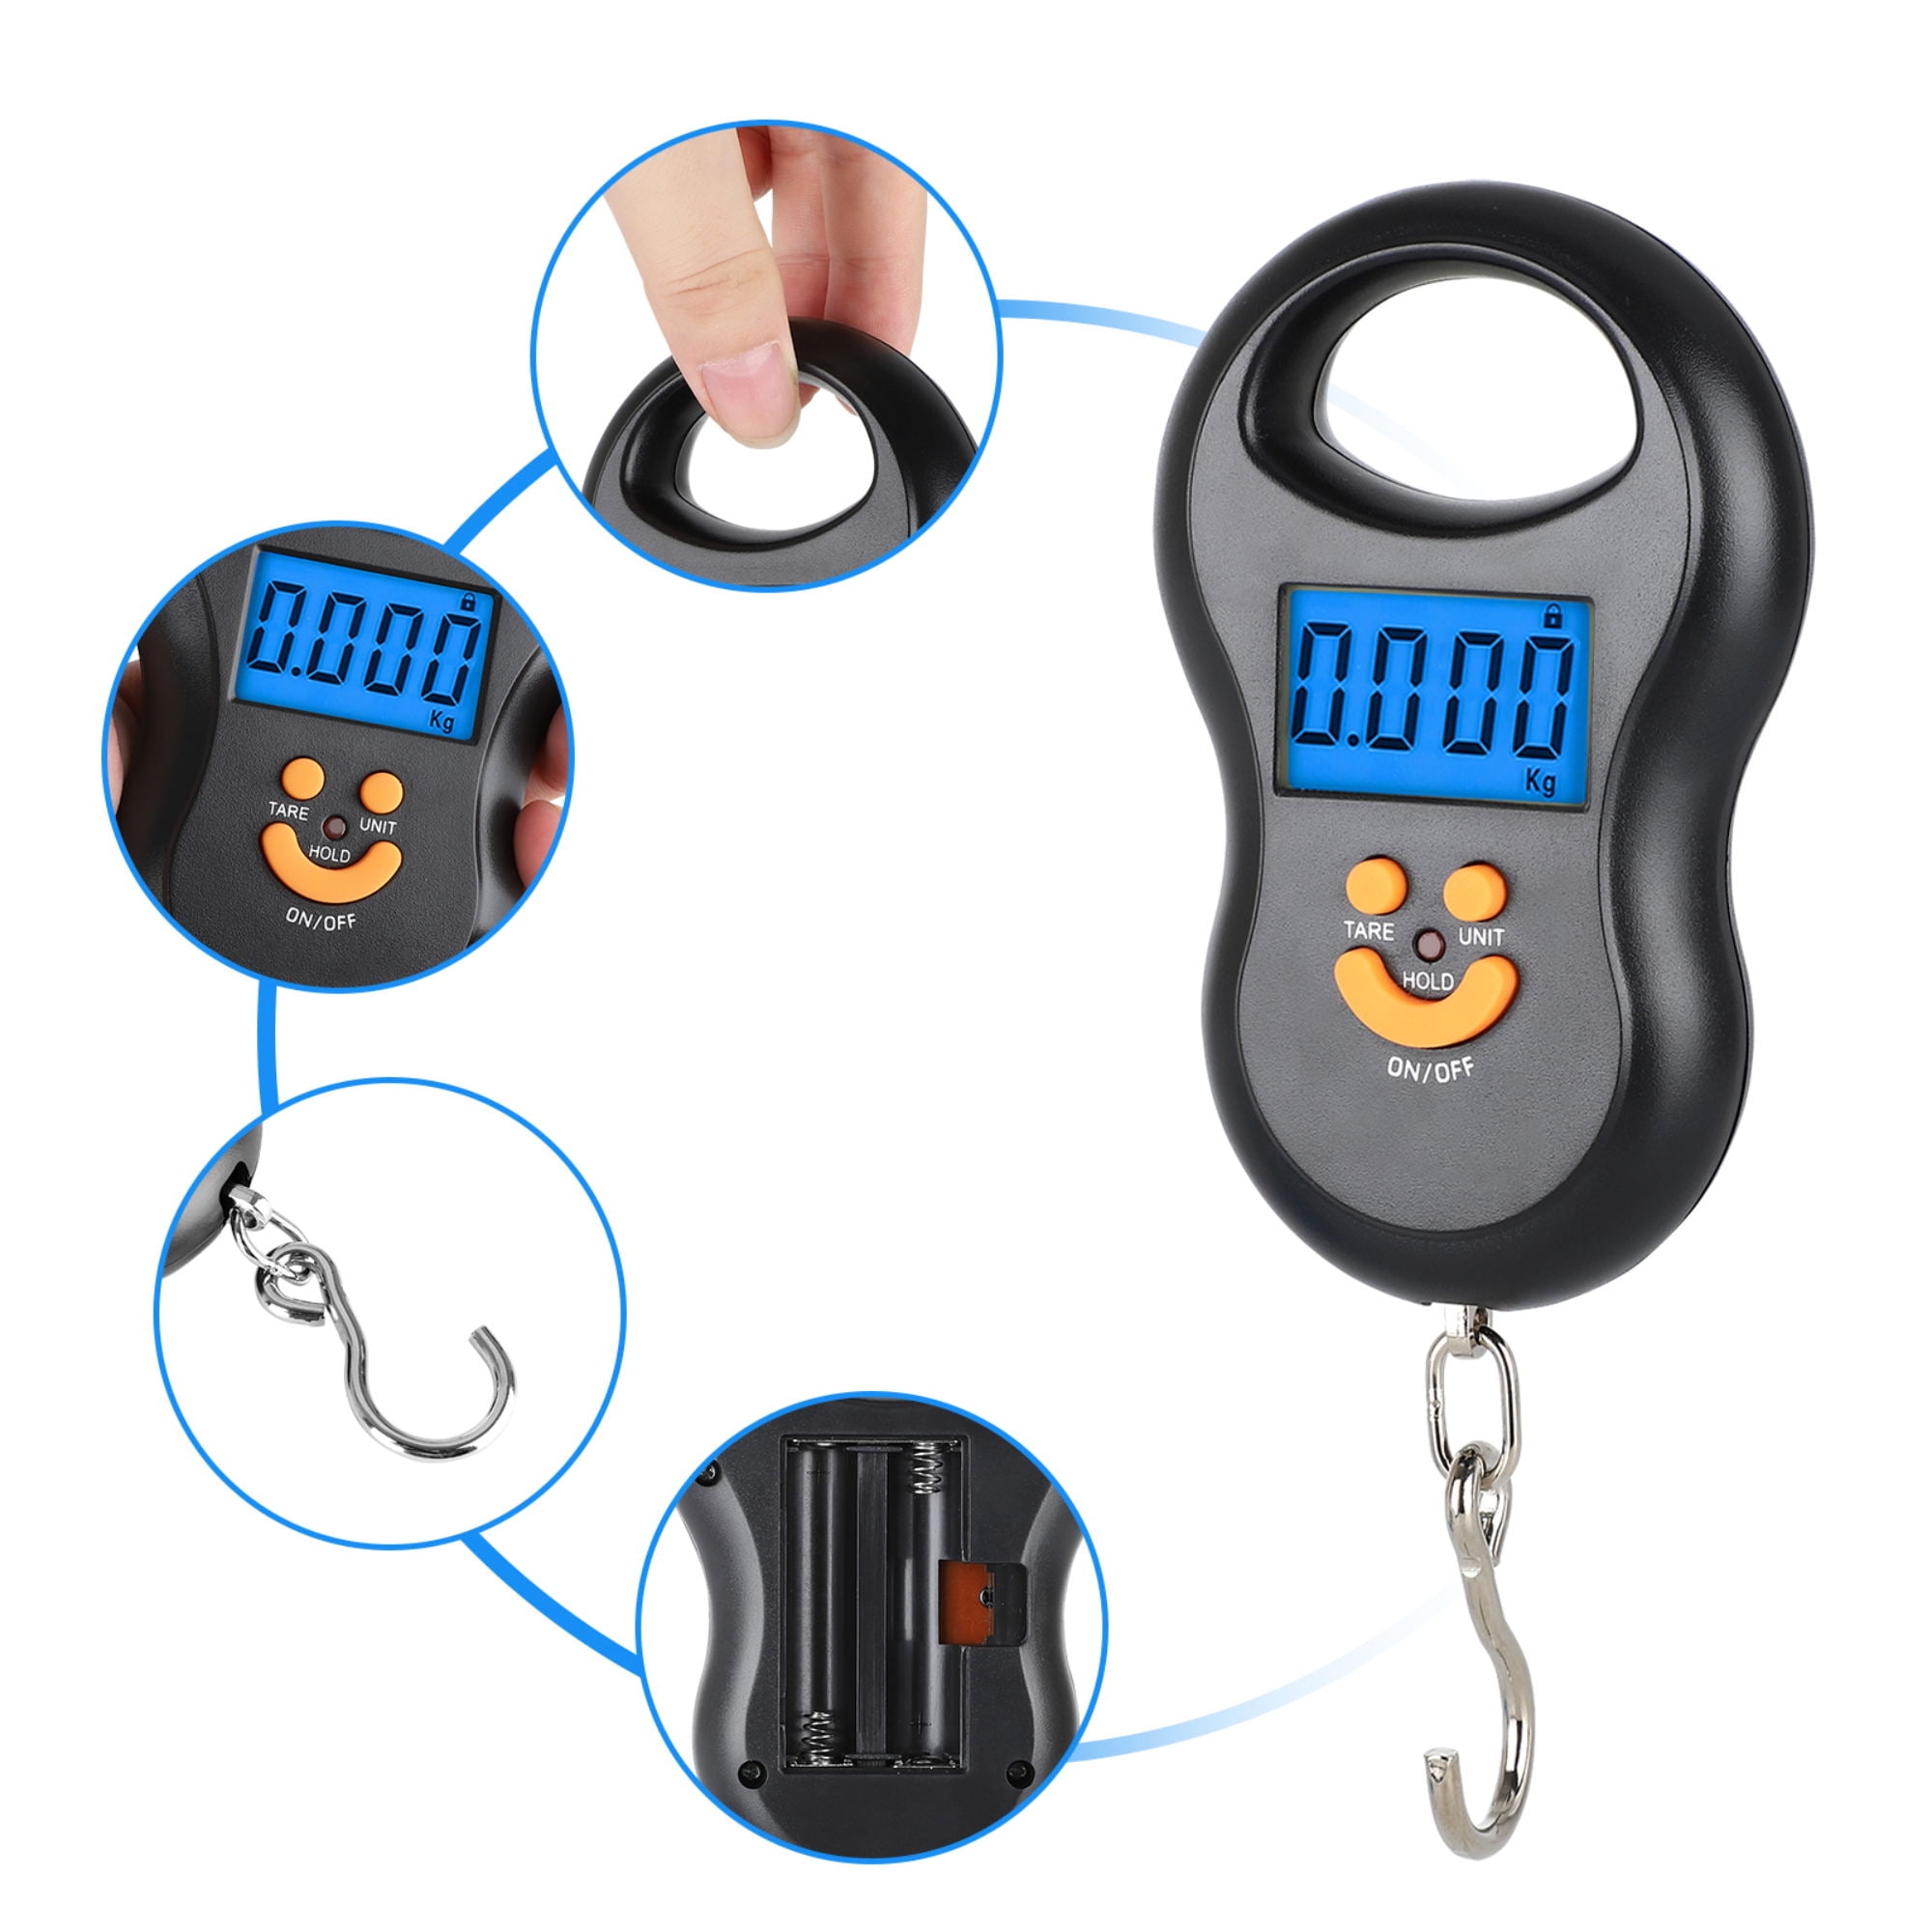 Wholesale Portable Digital Scale 50KG Capacity With Hanging Hook For  Fishing, Travel, And Luggage Scales Free DHL Shipping From Water2018, $3.35